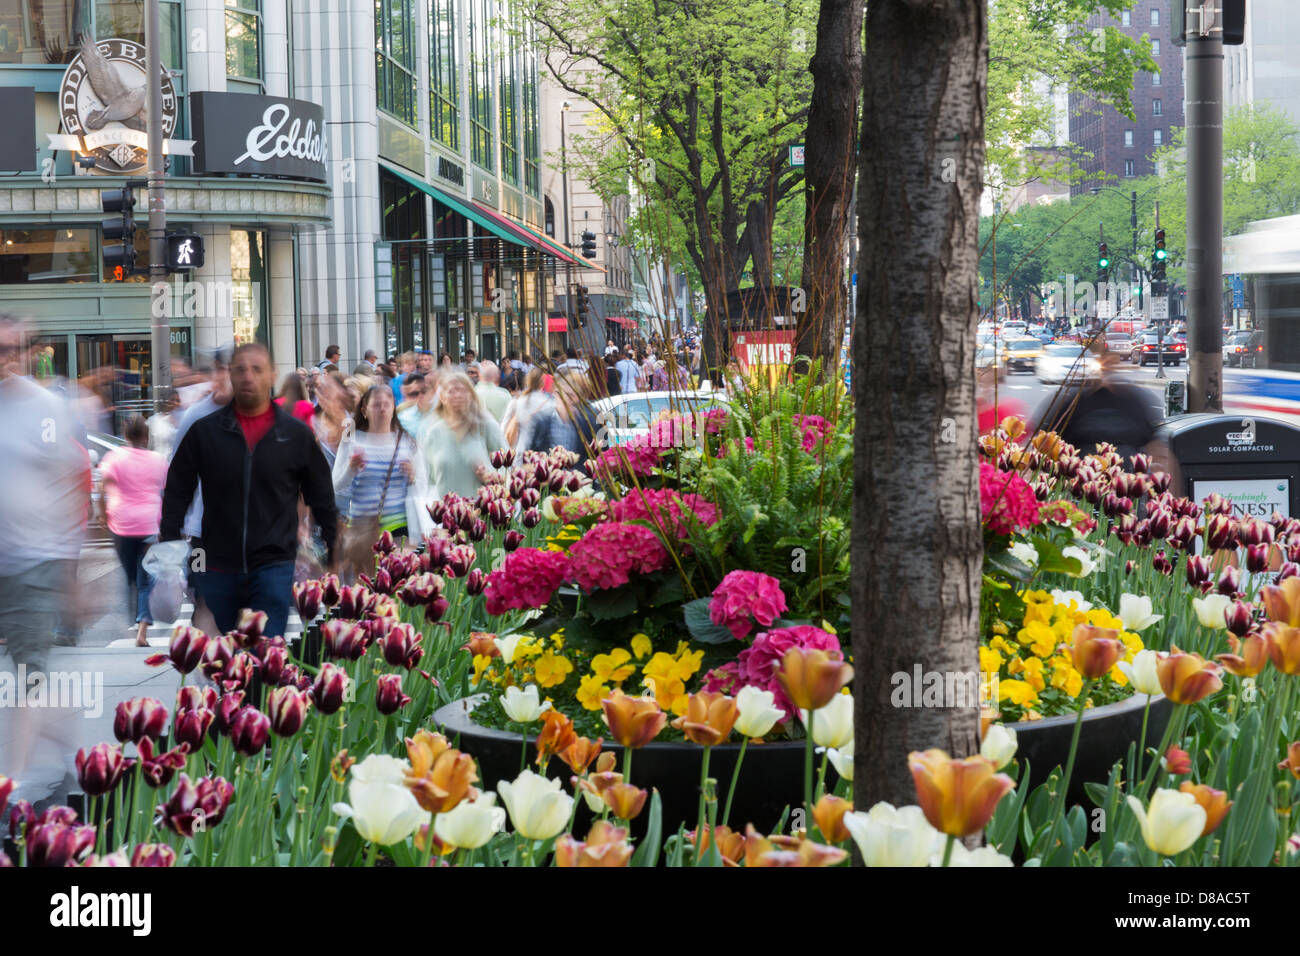 shoppers on michigan avenue magnificent mile chicago walking window shopping in the spring summer season with tulips flowers Stock Photo